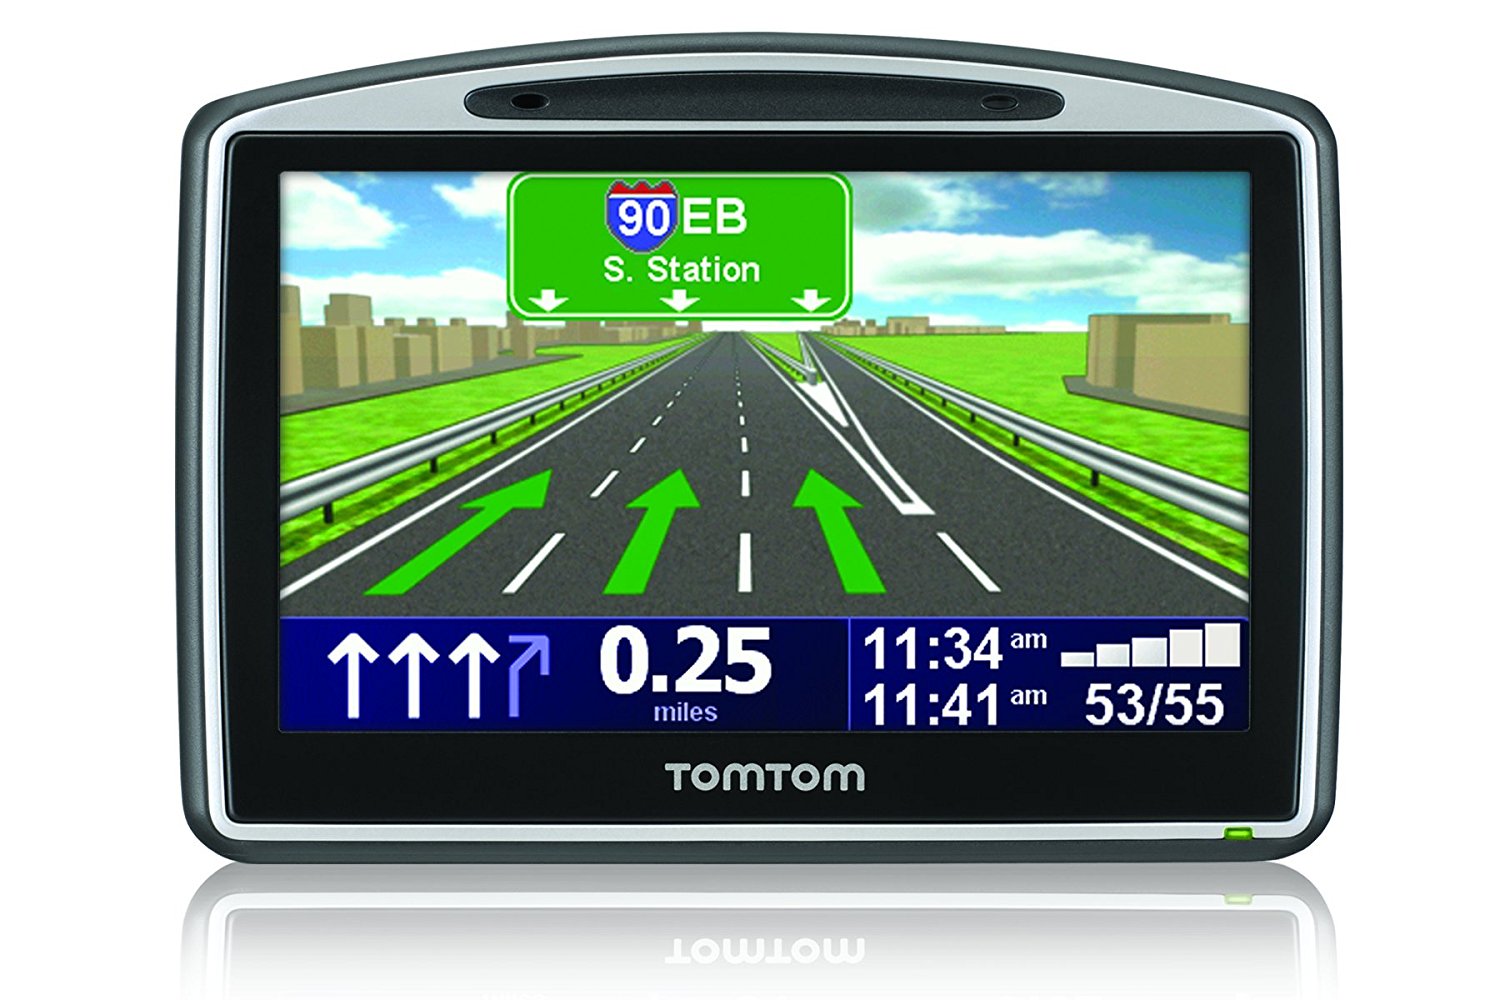 update maps on tomtom gps for free